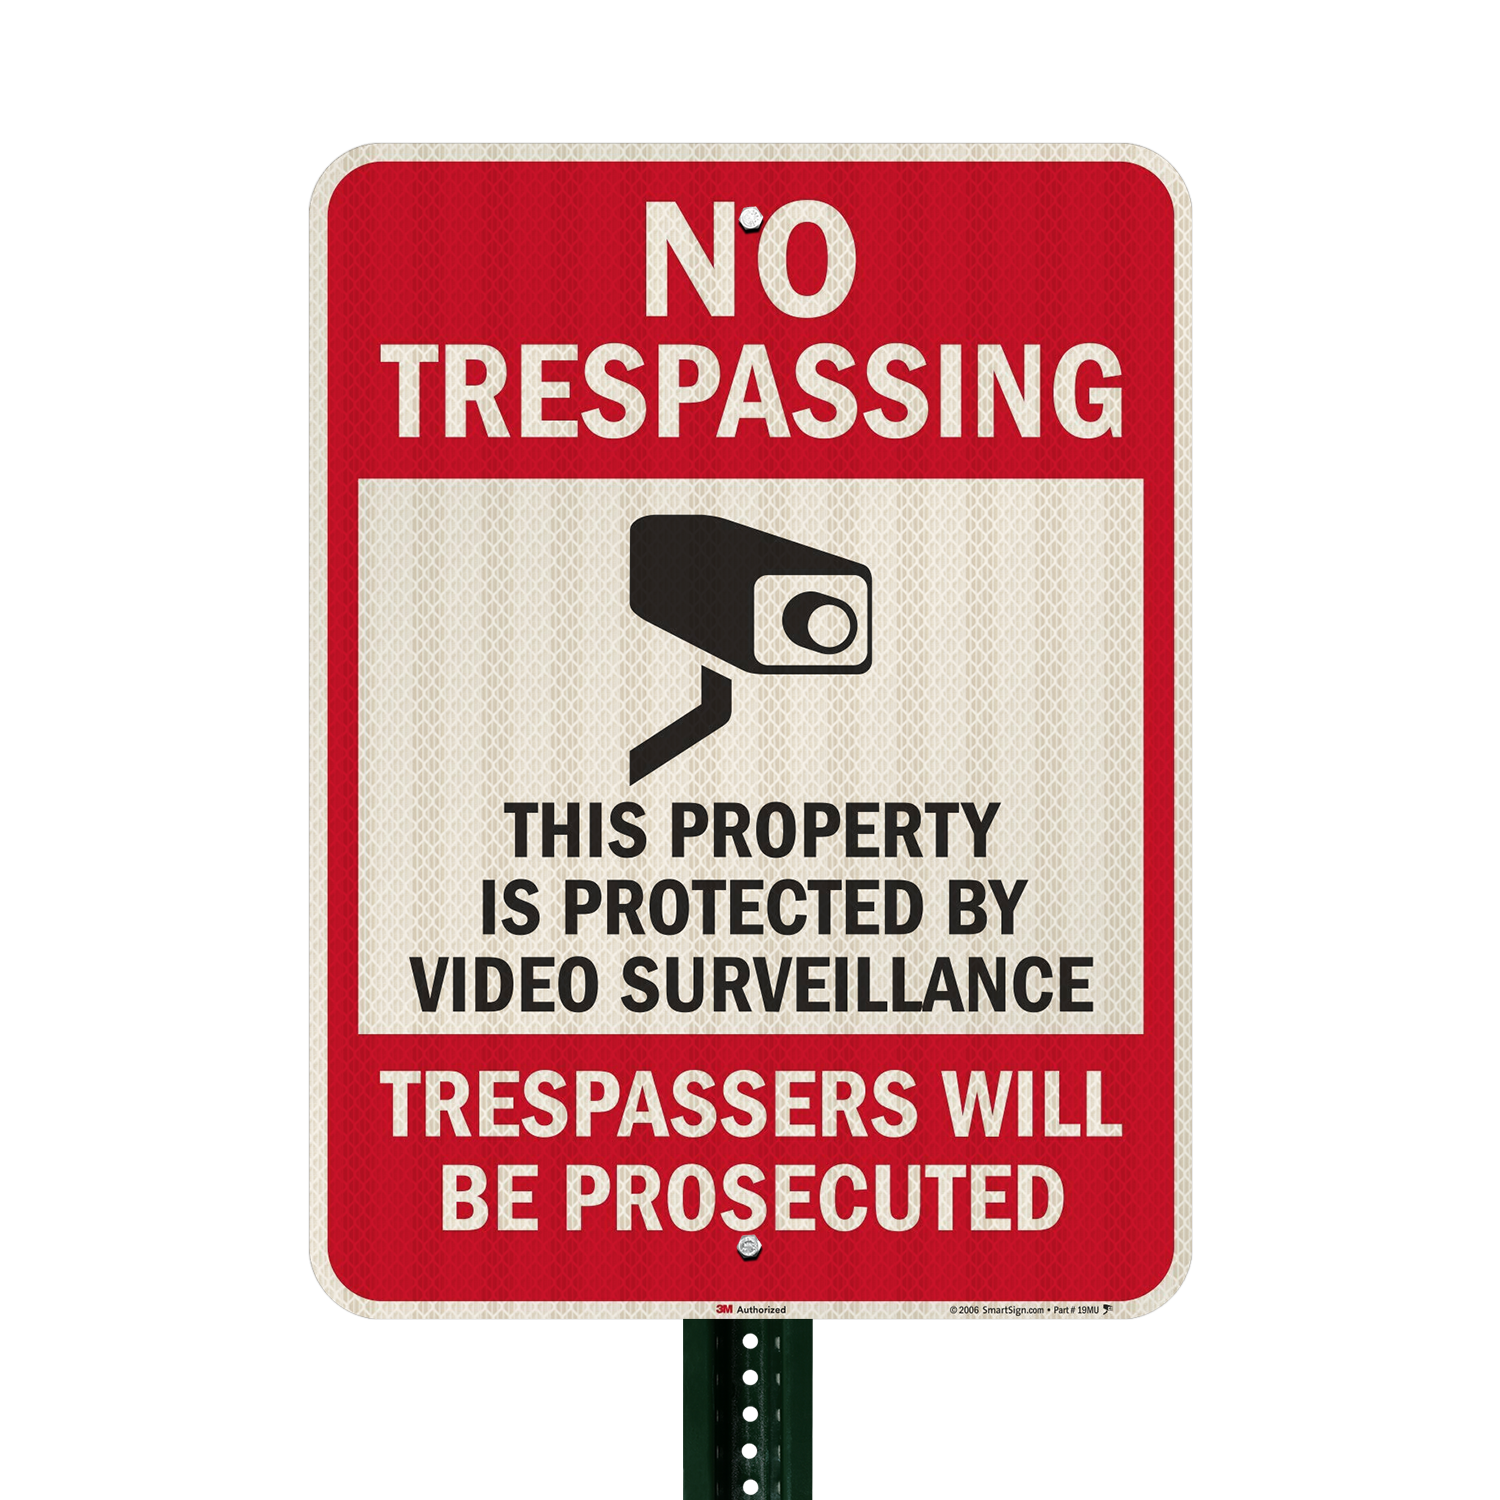 4-Pack Video Surveillance Sign UV Protected & Waterproof 10.5 x 8 Inches 0.40 Aluminum Sign Indoor Outdoor with Screws and Zips Enlarge Version No Trespassing Metal Reflective Warning Sign